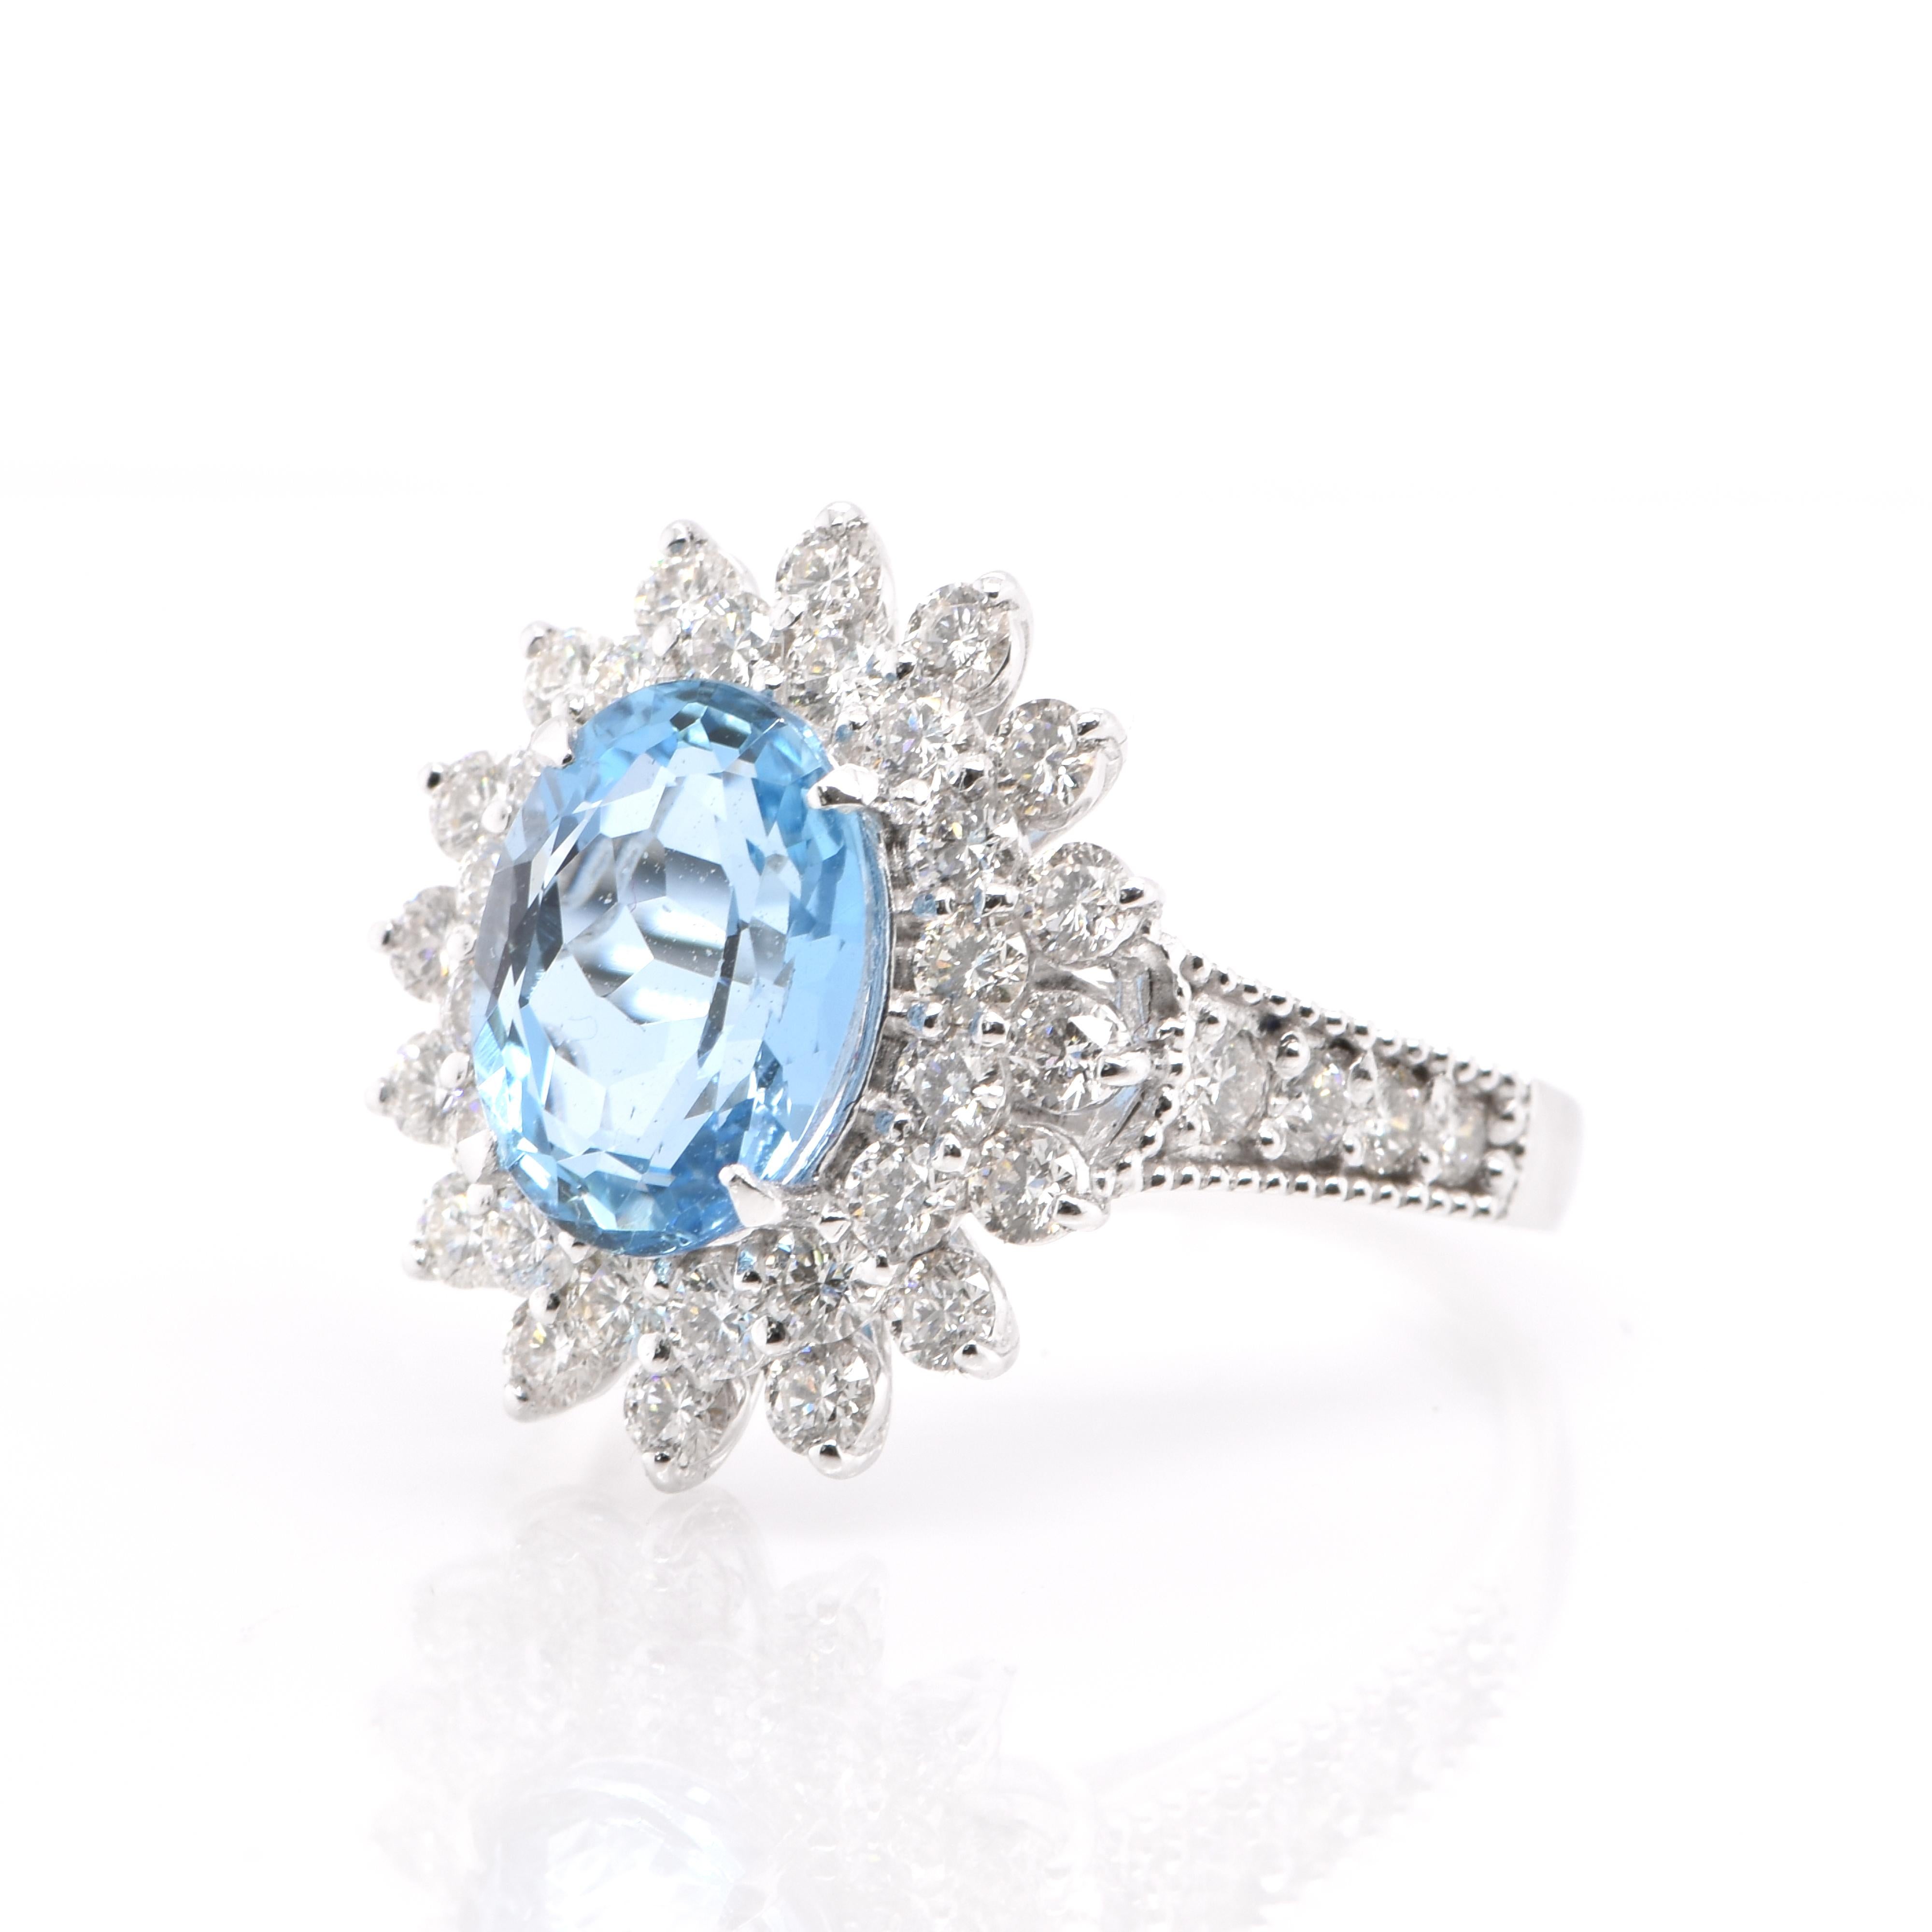 A classy 2.46 Carat, Natural Oval-Shaped, Santa-Maria Colored Aquamarine Cocktail Ring with 1.31 Carats of Diamond Accents set in Platinum. Aquamarines have been prized gems throughout human history for their cool blue color. They historically come